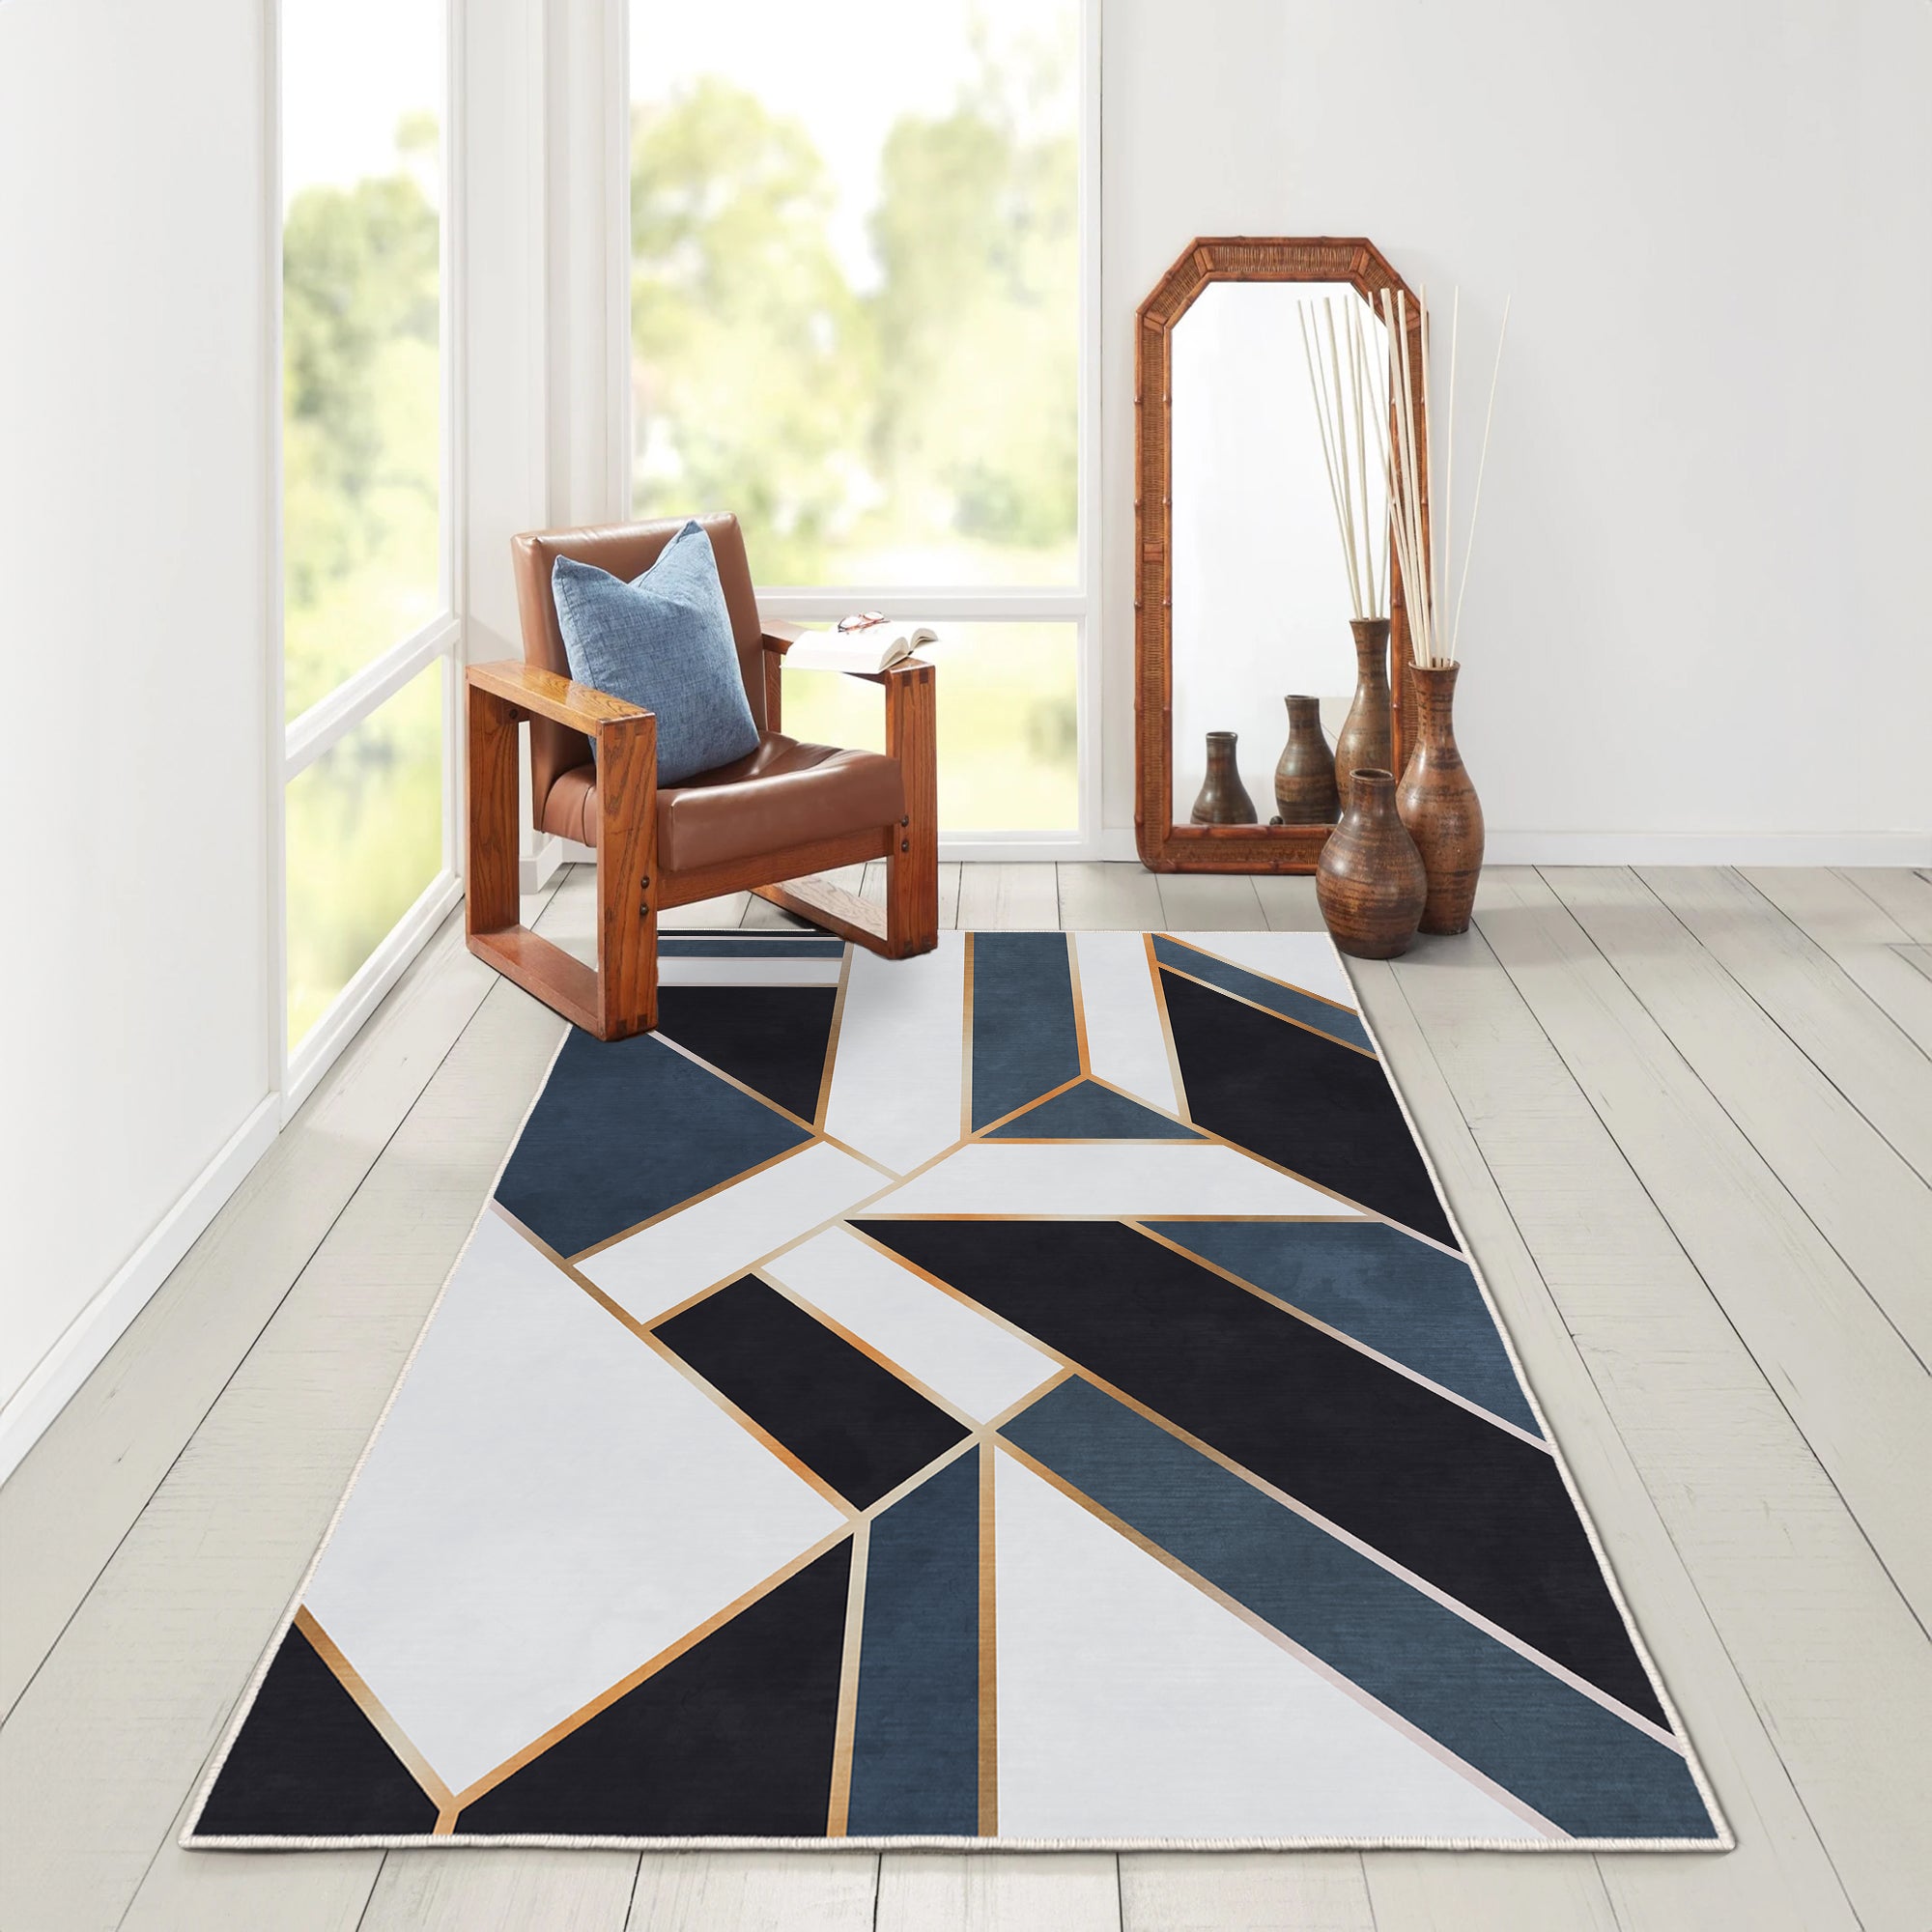 Washable Area Rugs,Blue,Rectangle,Rug with Non Slip Backing, Stain Resistant, Foldable, Boho Machine Washable Carpet Mat for Kitchen, Bathroom, Bedroom or Living Room